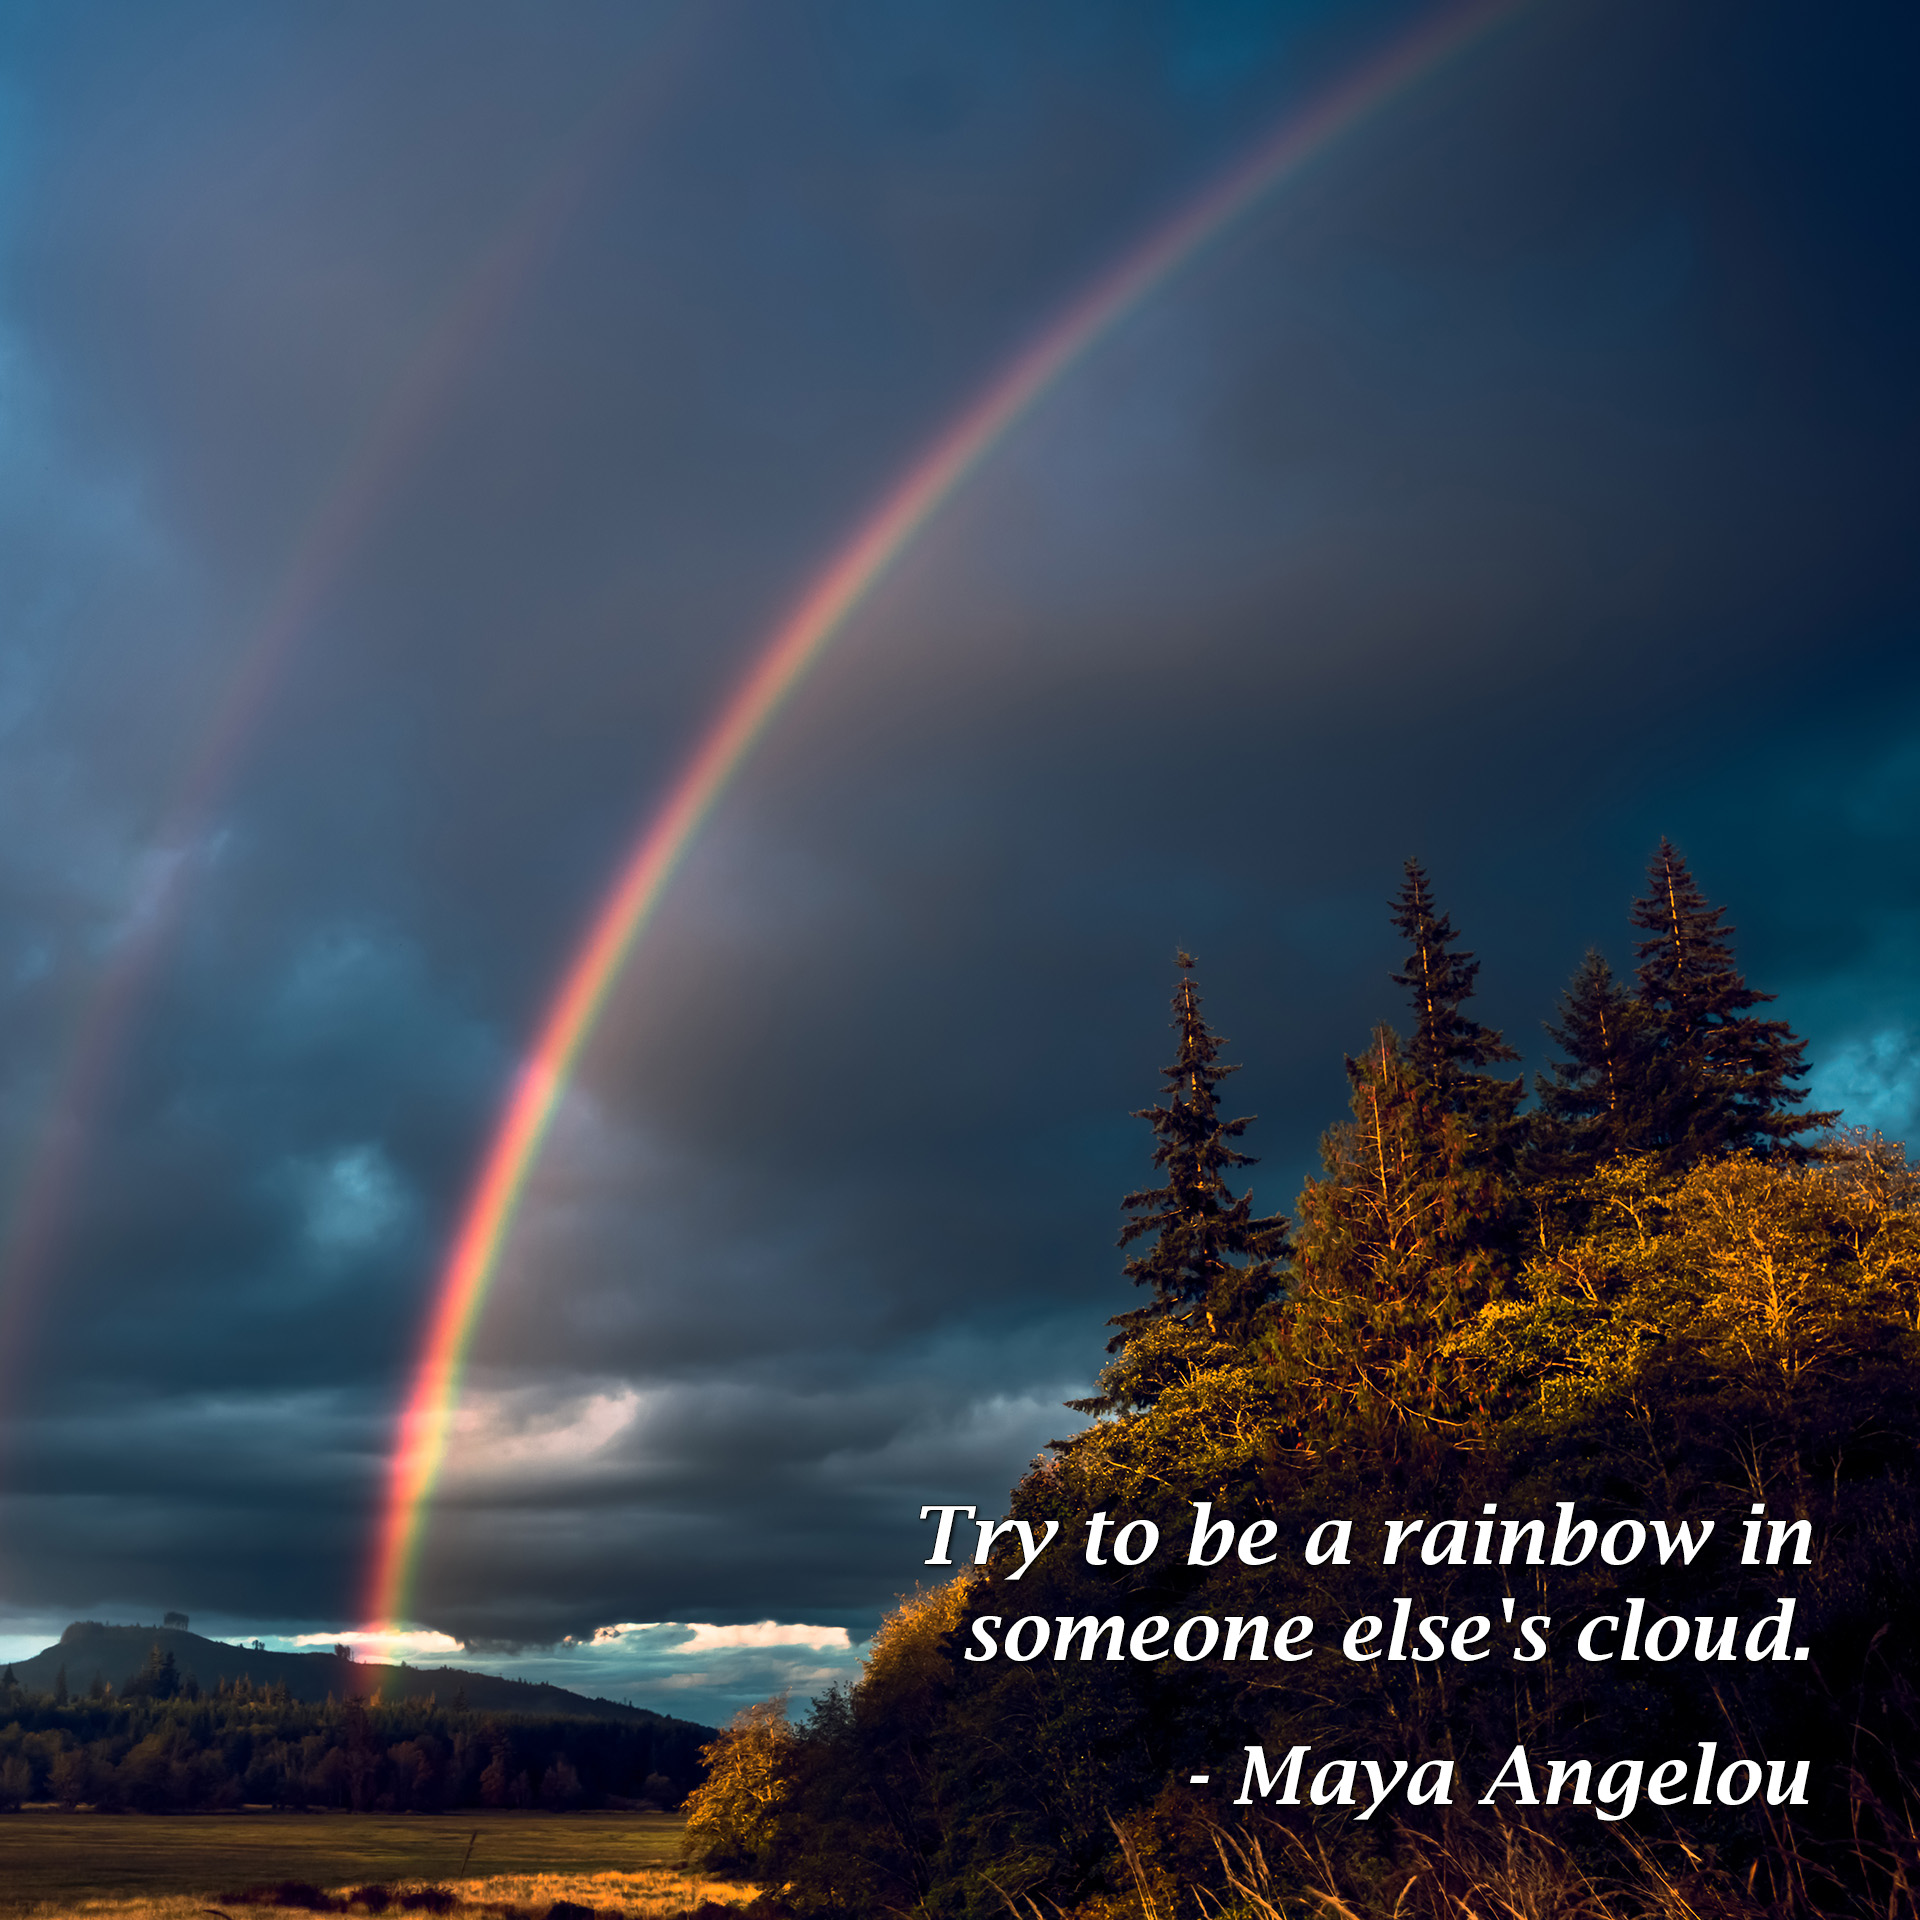 Try to be a rainbow in someone else's cloud. - Maya Angelou